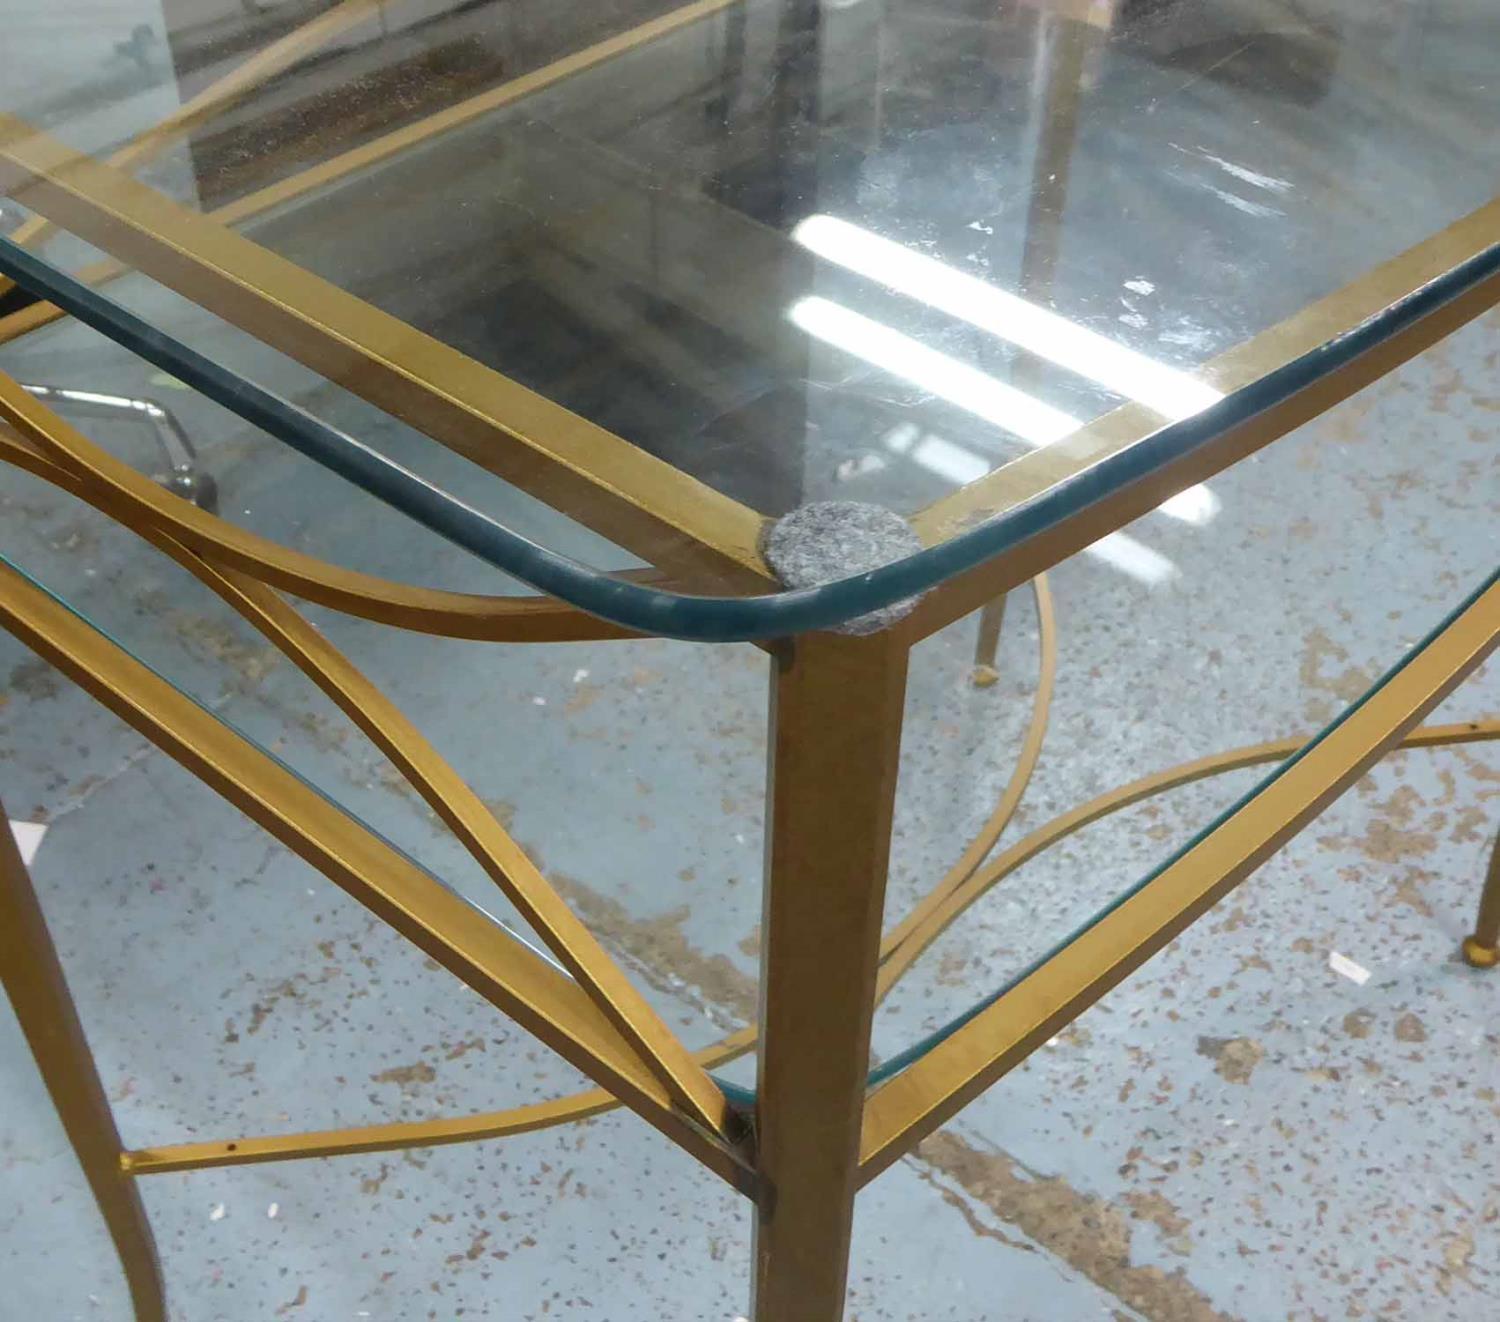 CONSOLE TABLE, bow fronted gilt metal with two tier glass shelves, 74cm x 44cm x 74cm H. - Image 2 of 2